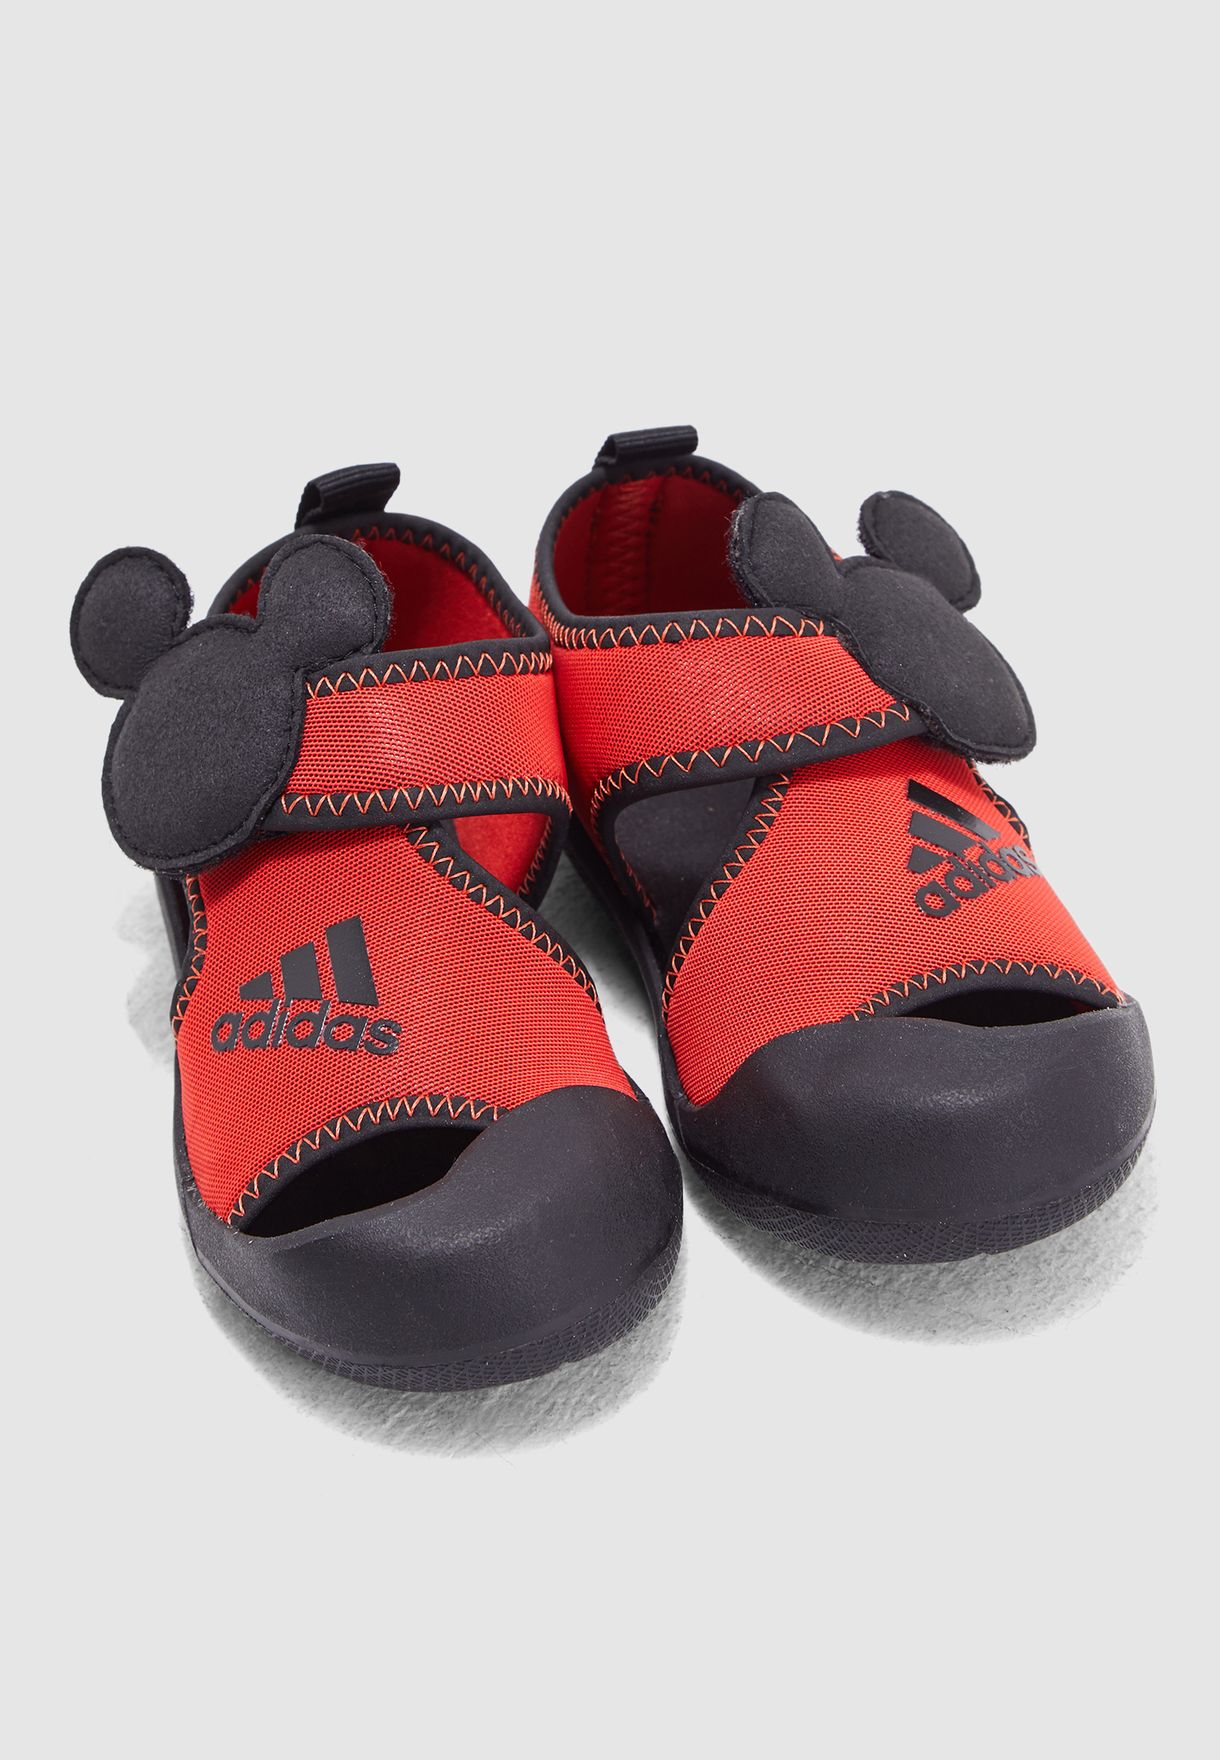 altaventure mickey shoes